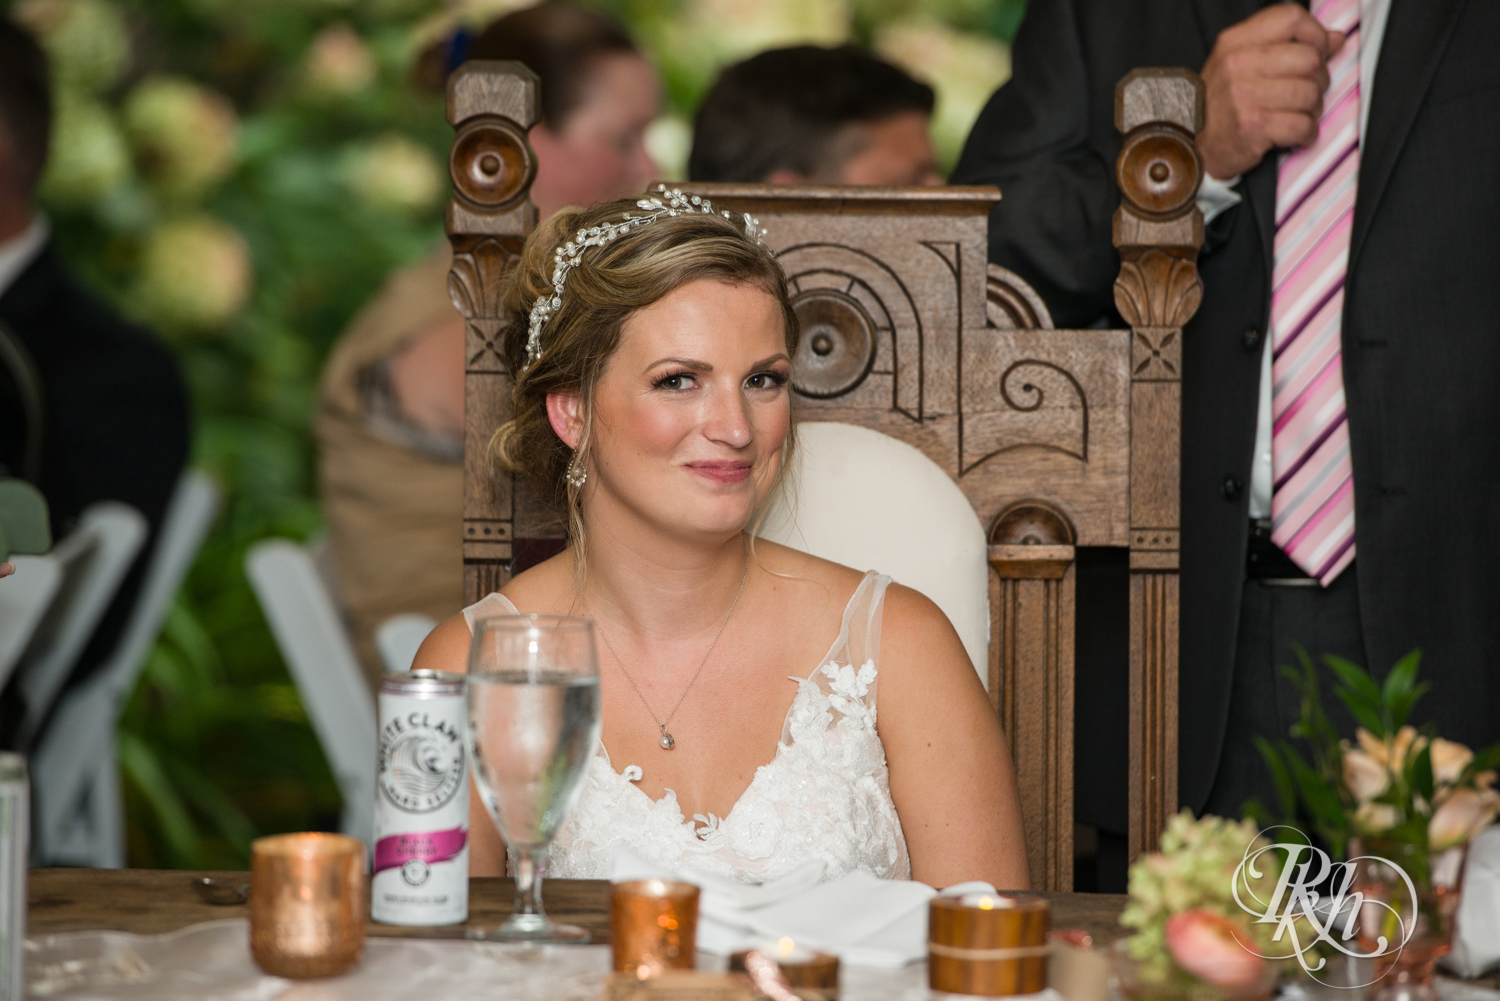 Bride and groom smile during speeches at wedding reception at Camrose Hill in Stillwater, Minnesota.